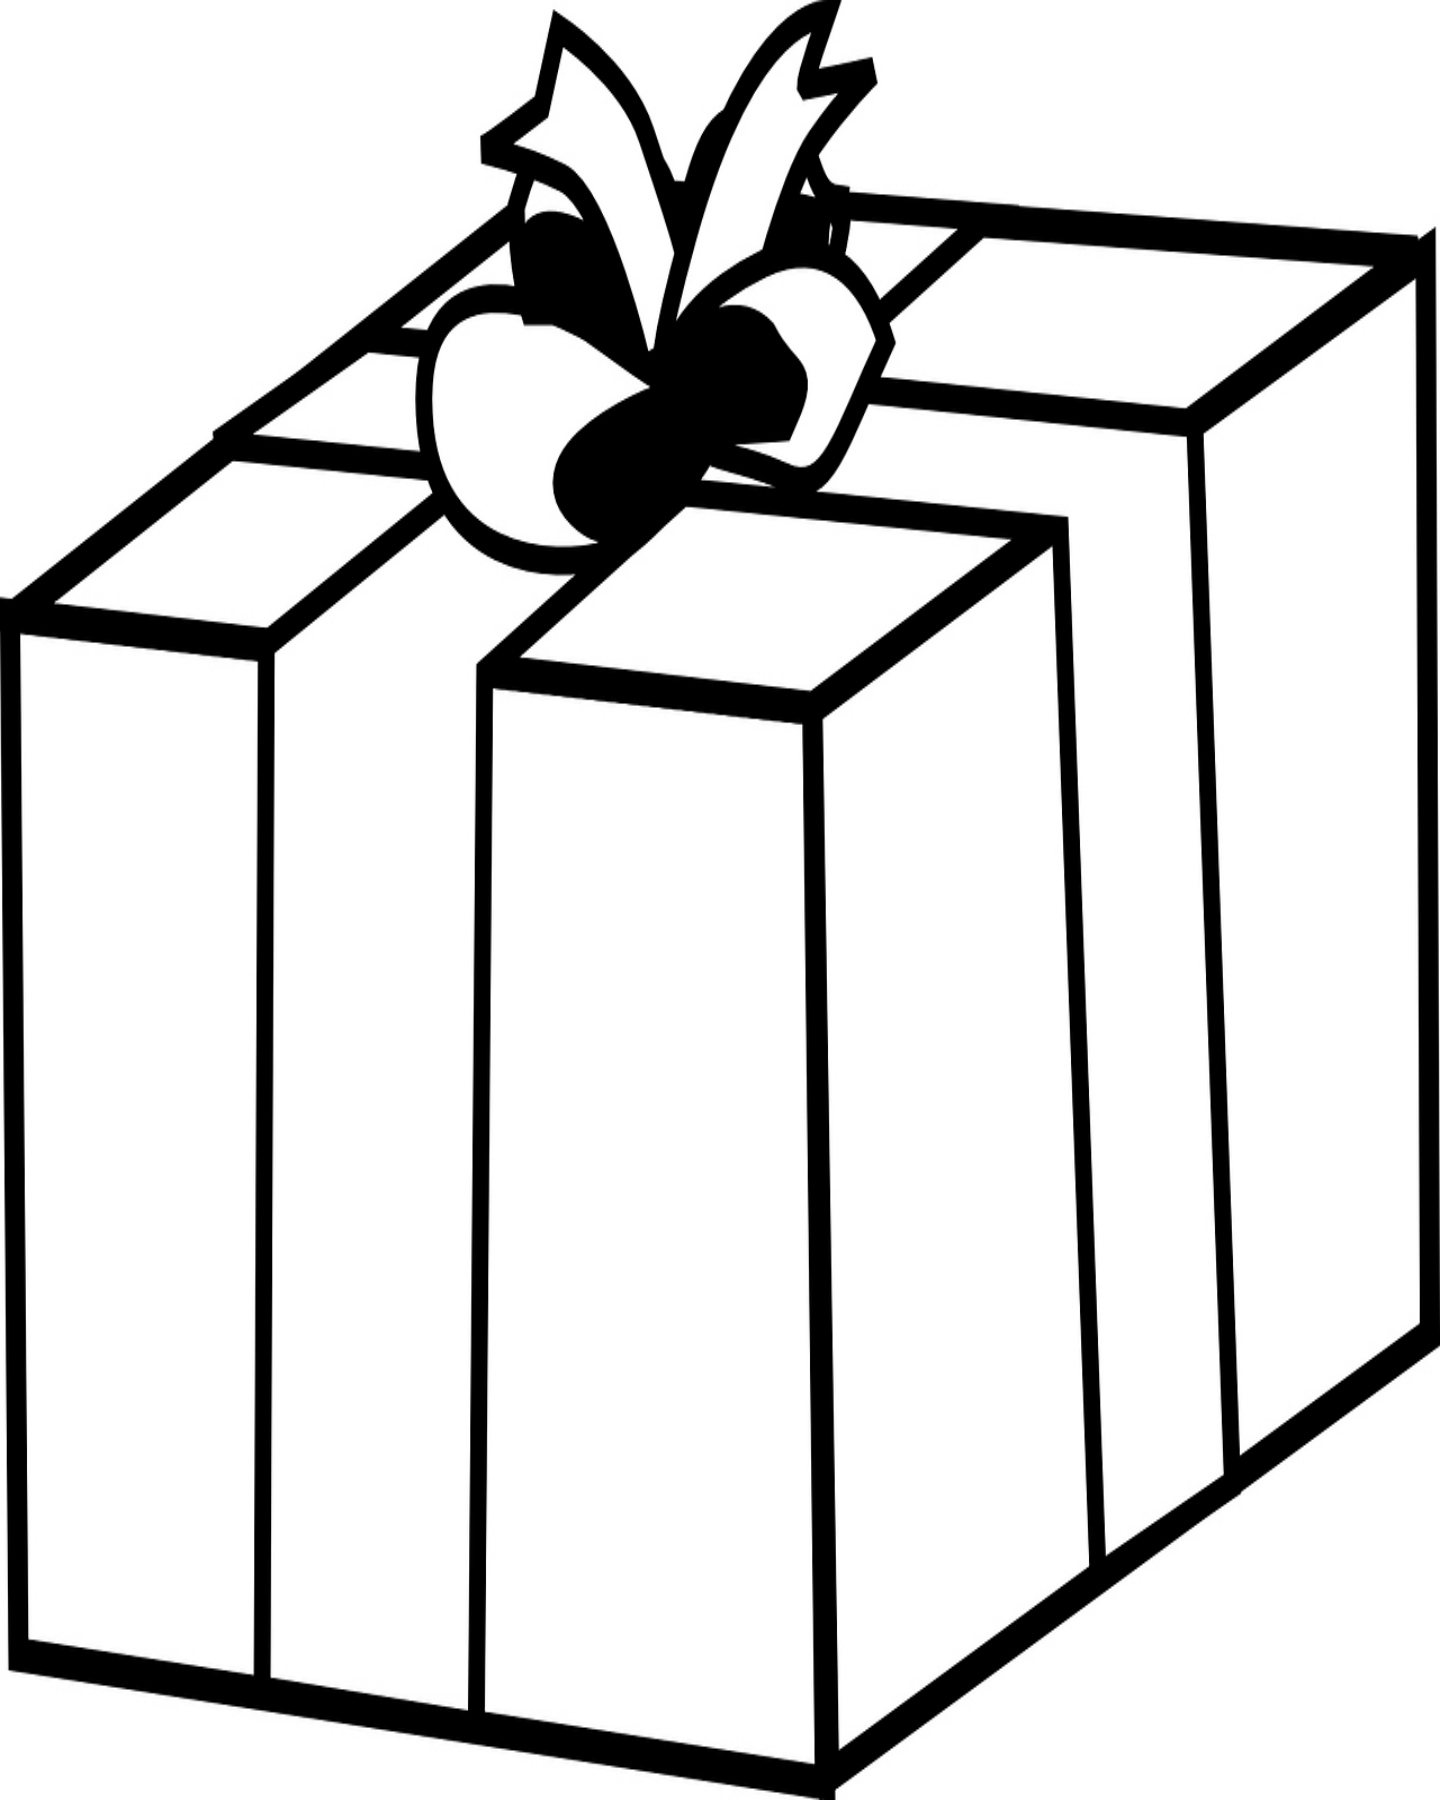 Gift Box Coloring Page at GetColorings.com | Free printable colorings